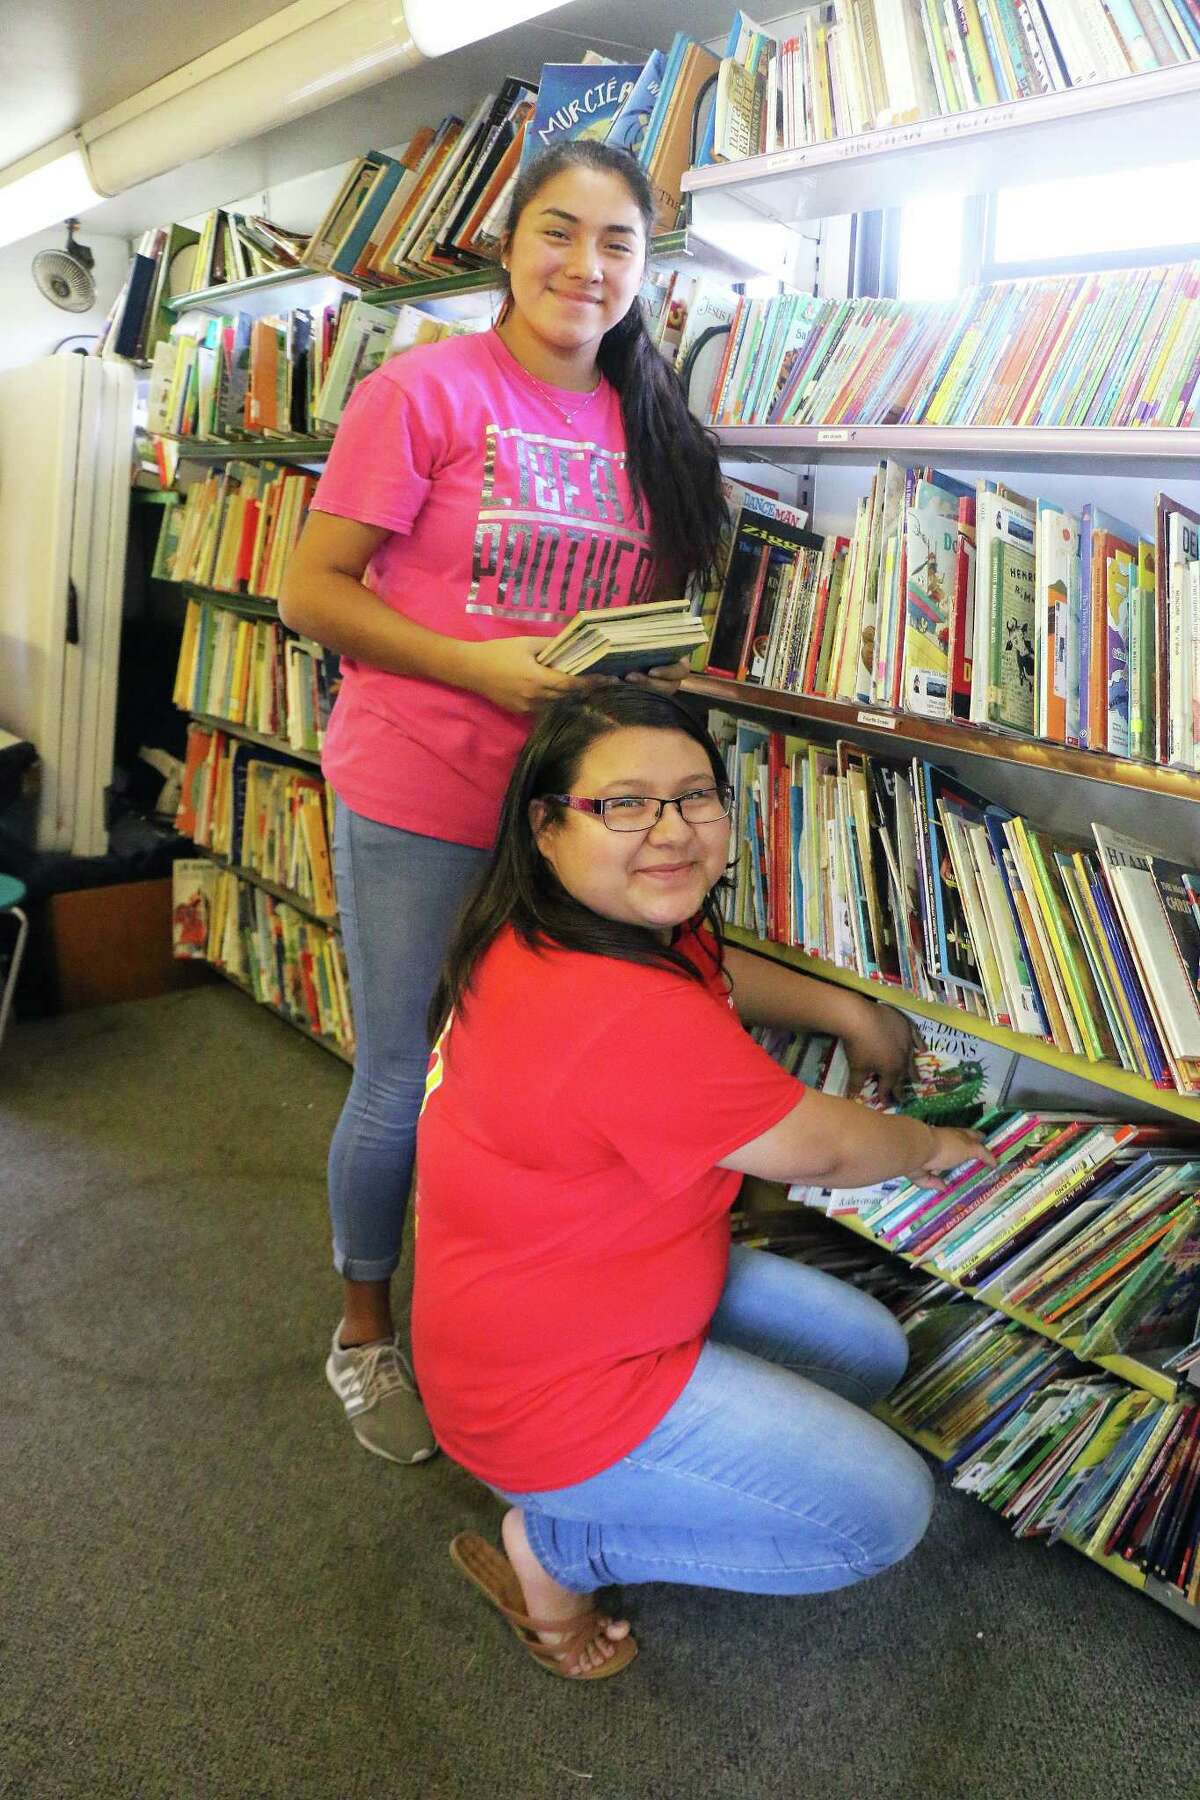 Senior Maribel Martinez and her friend junior Indira Samano straighten books before the next group of kids come onboard the LISD Bookmobile. The two have volunteered to work on the bus every summer since its inception four years ago.